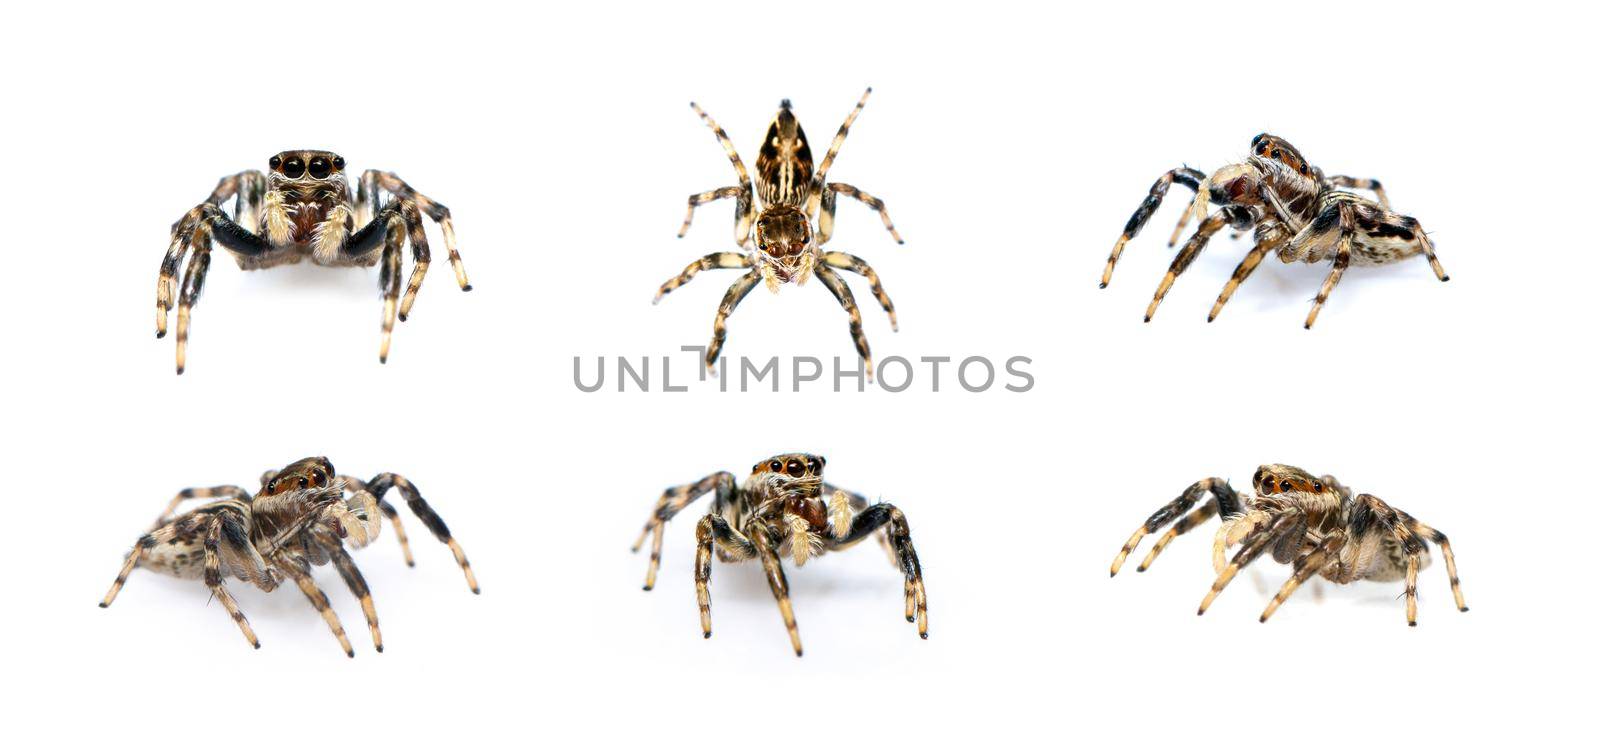 Group of jumping spider isolated on white background. Insect Animals.  by yod67